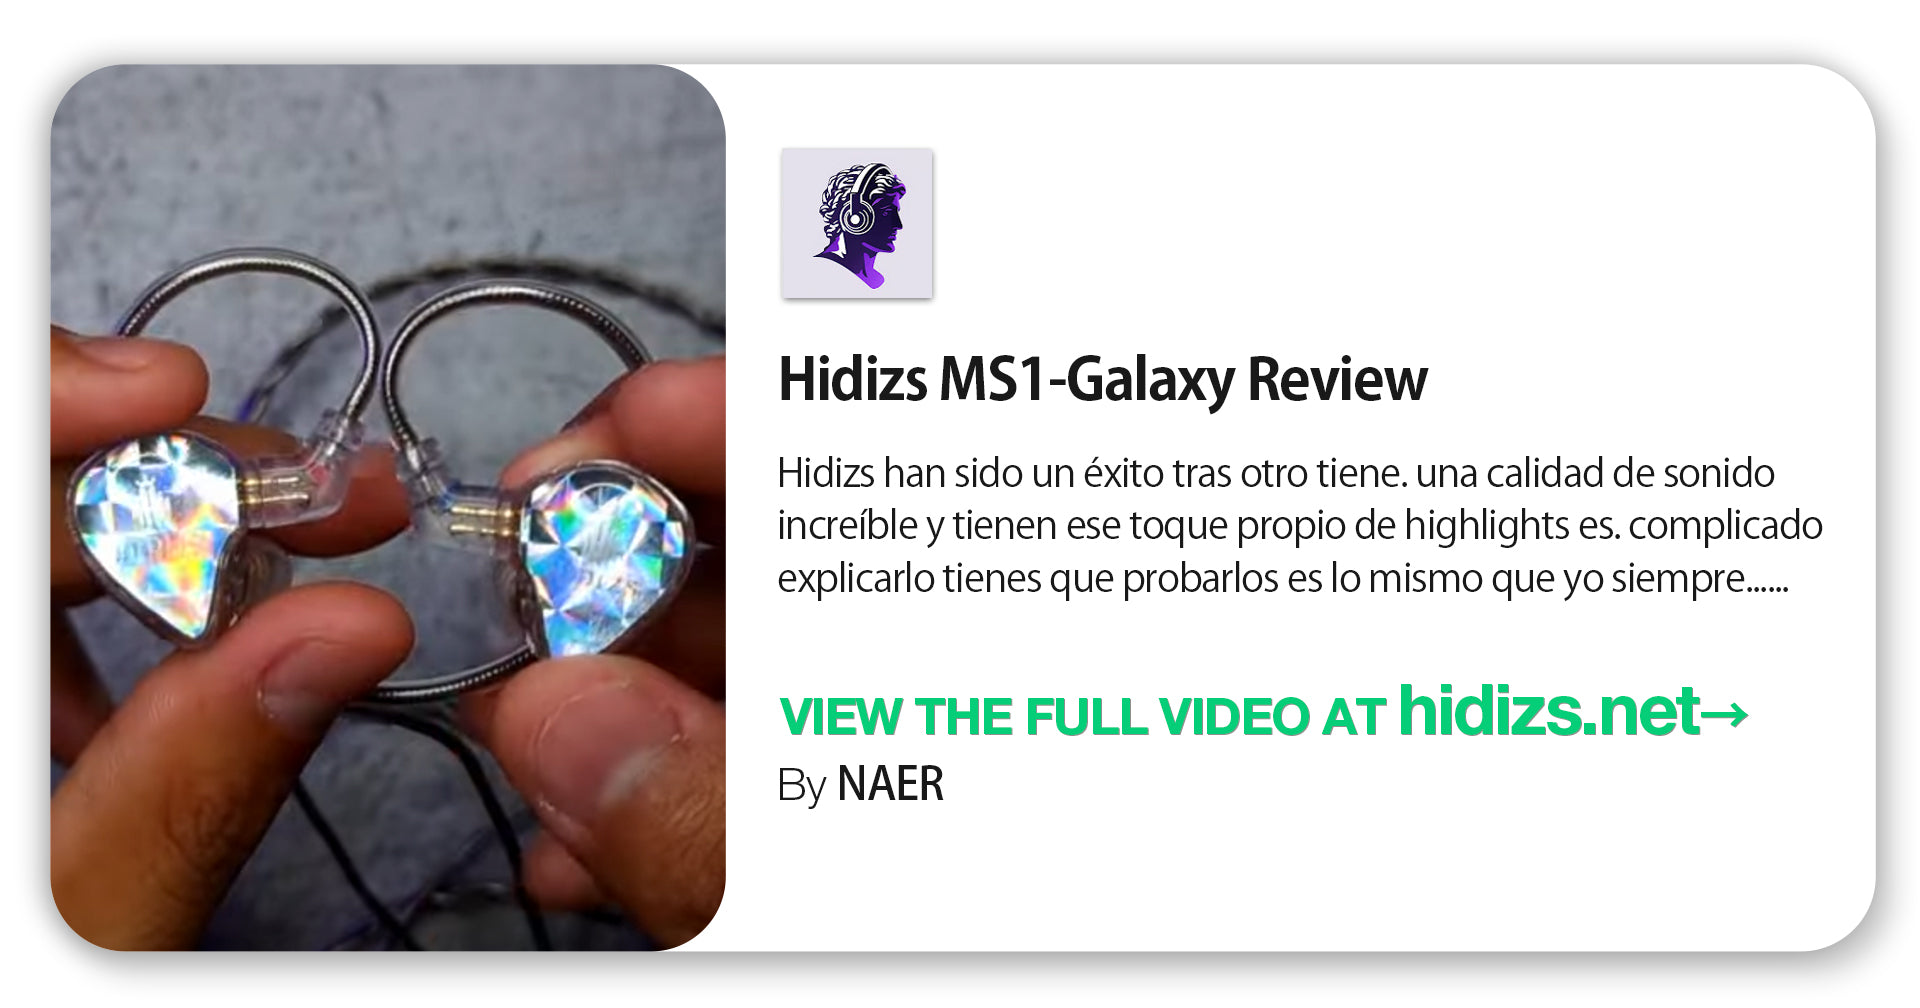 Hidizs MS1-Galaxy Review - NAER